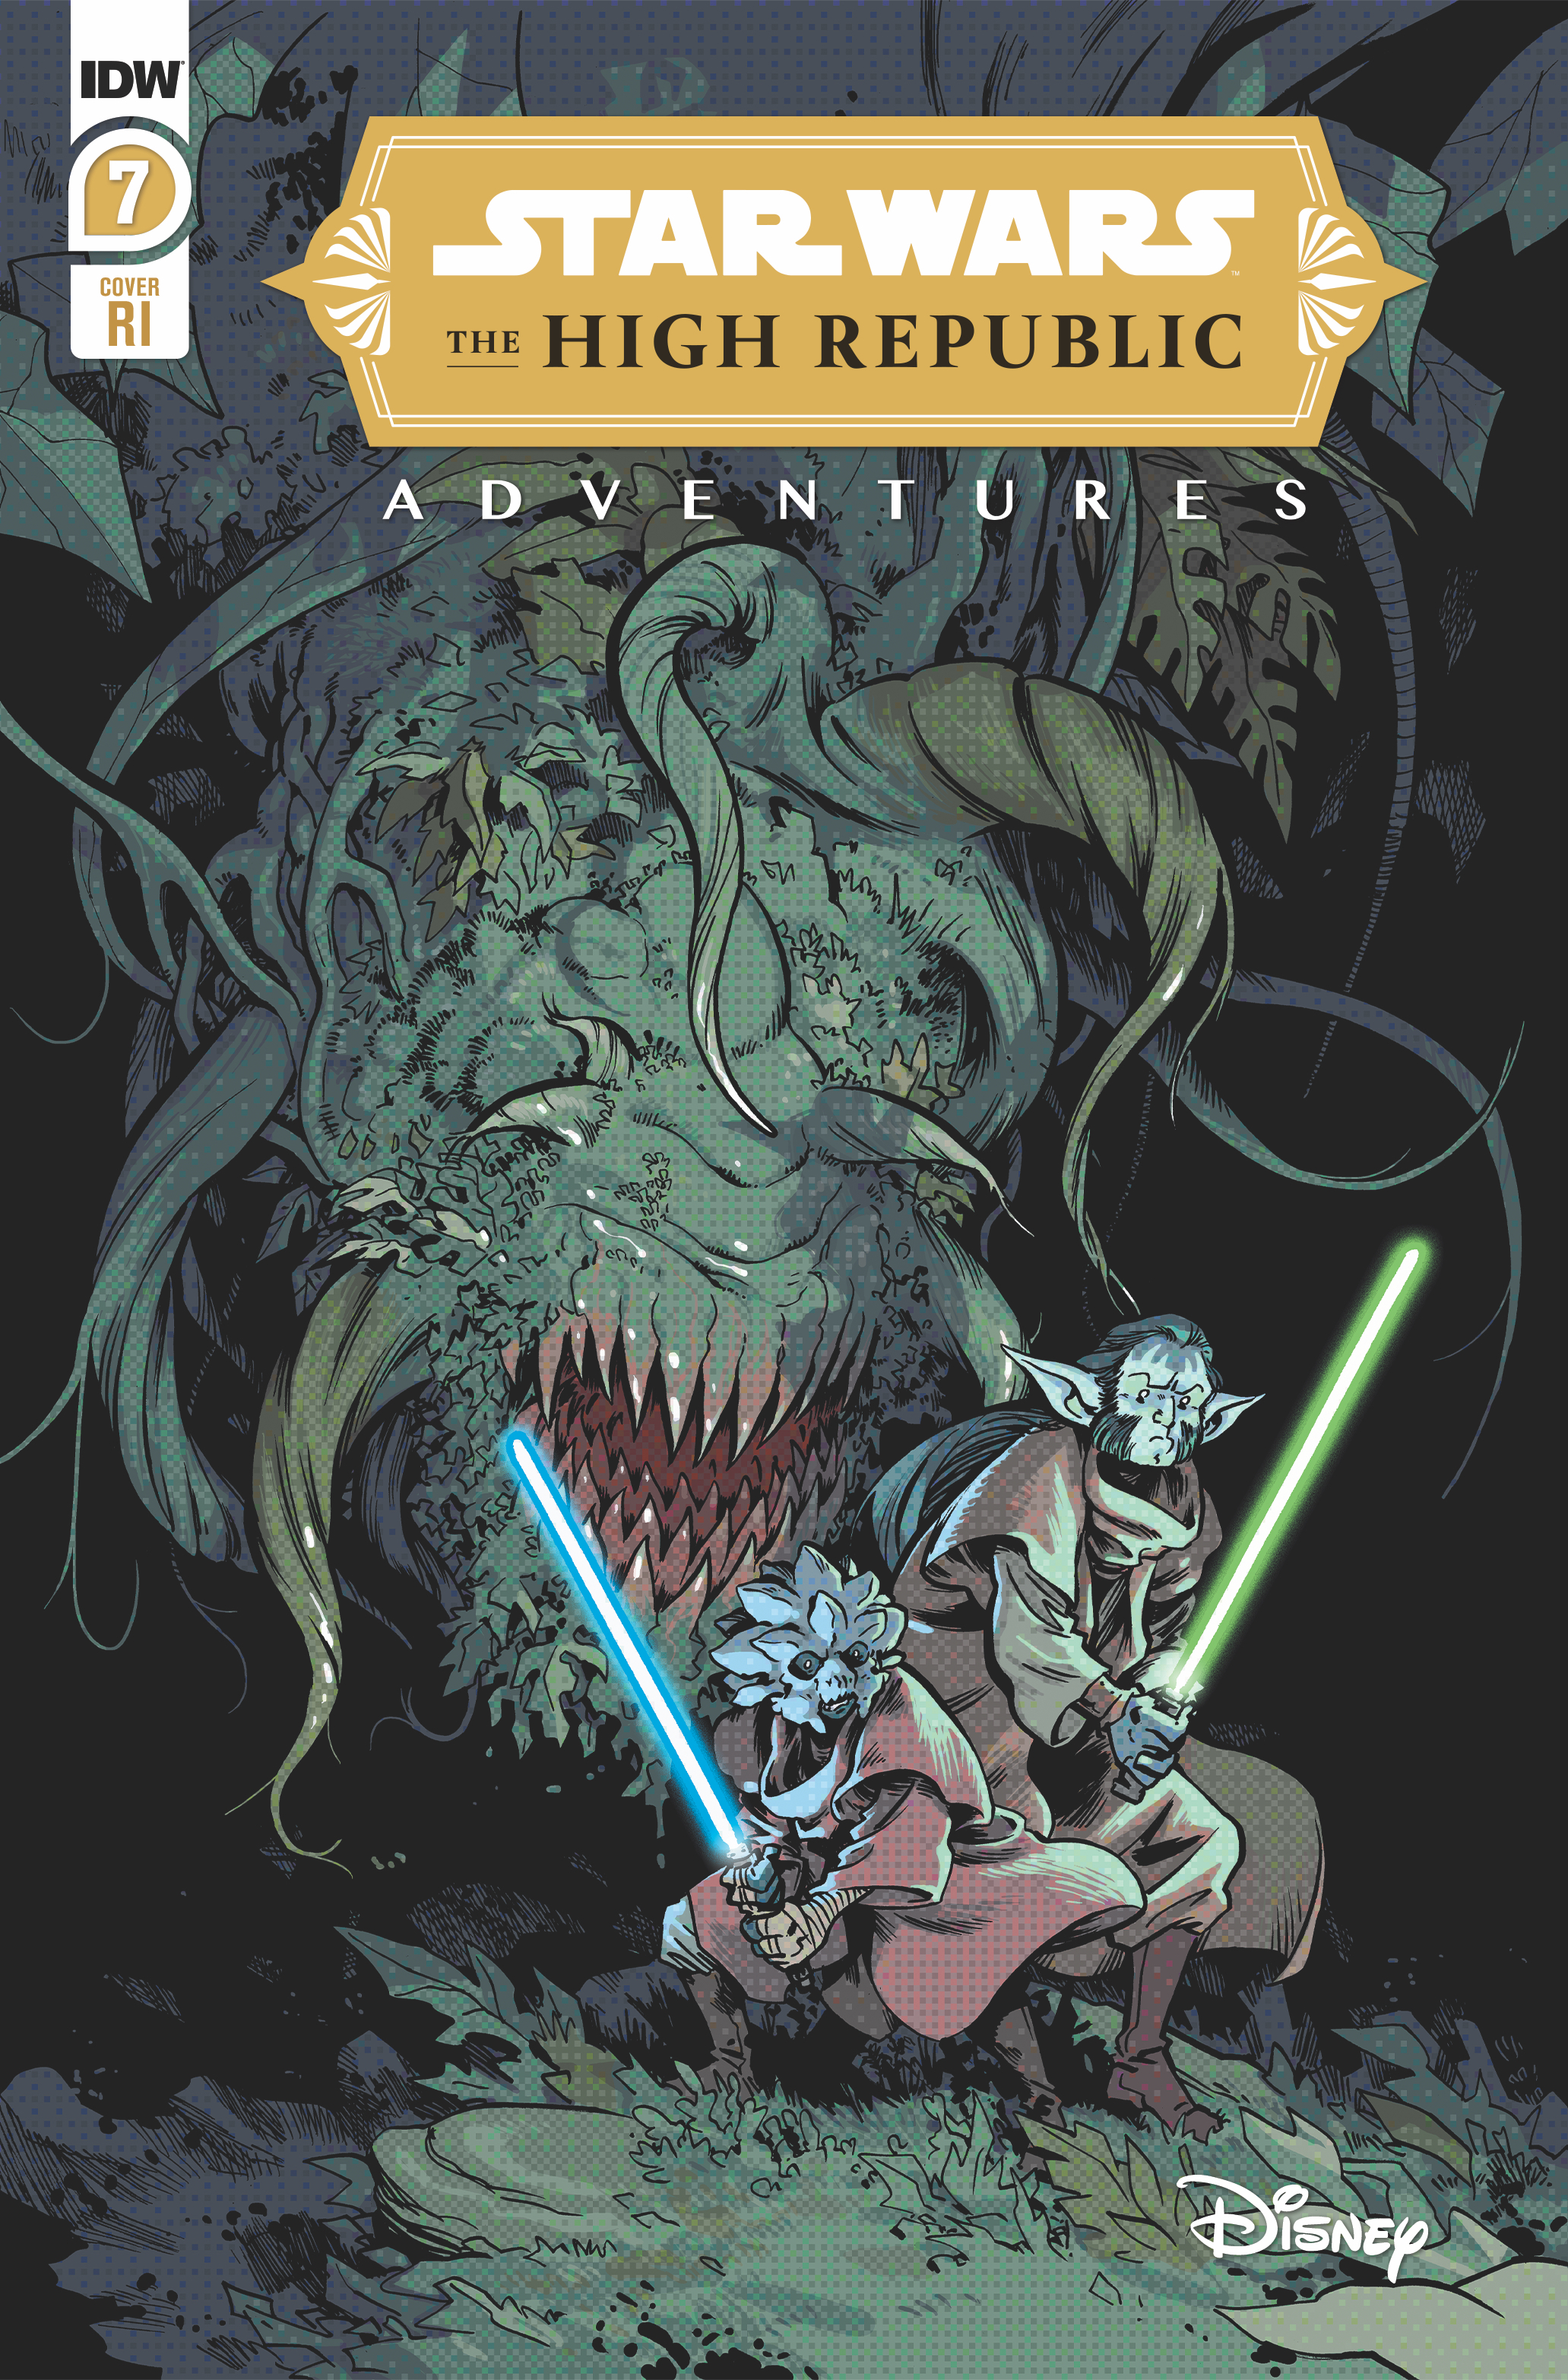 Star Wars the High Republic Adventures #7 Cover B 1 for 10 Incentive Kyriazis